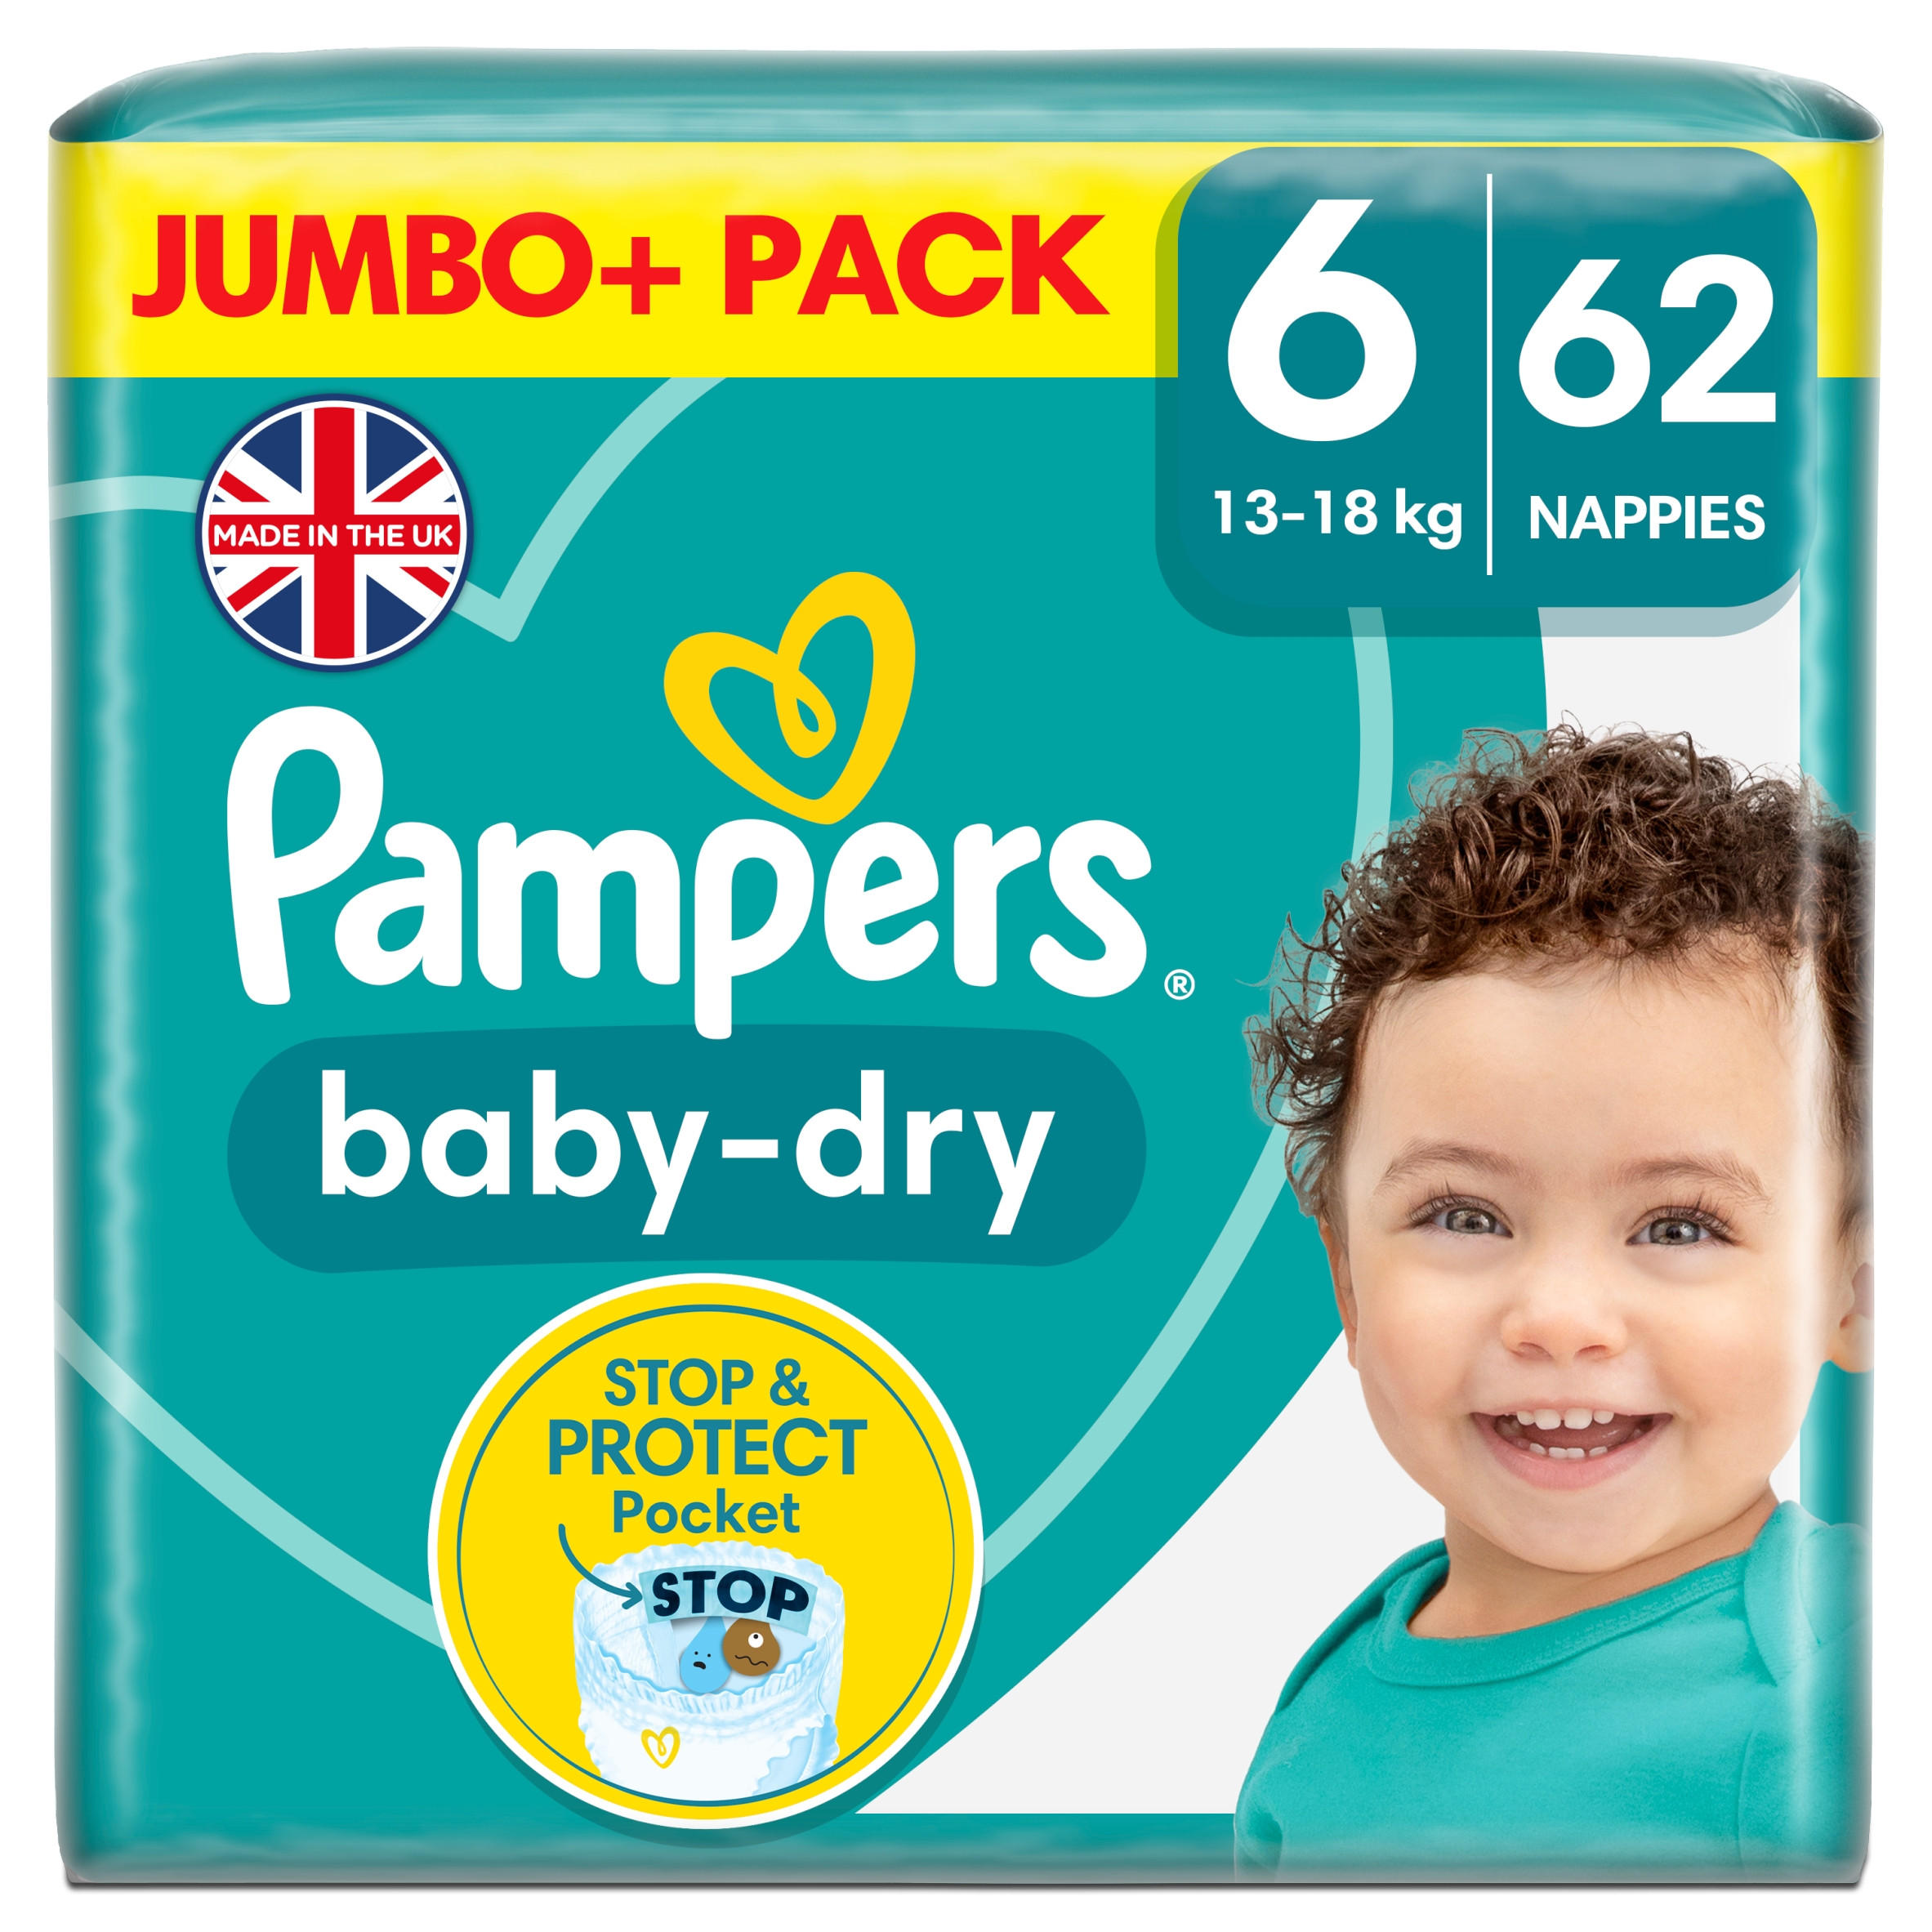 Pampers BabyDry Size 6, 62 Nappies, 13kg18kg, Jumbo+ Pack Baby